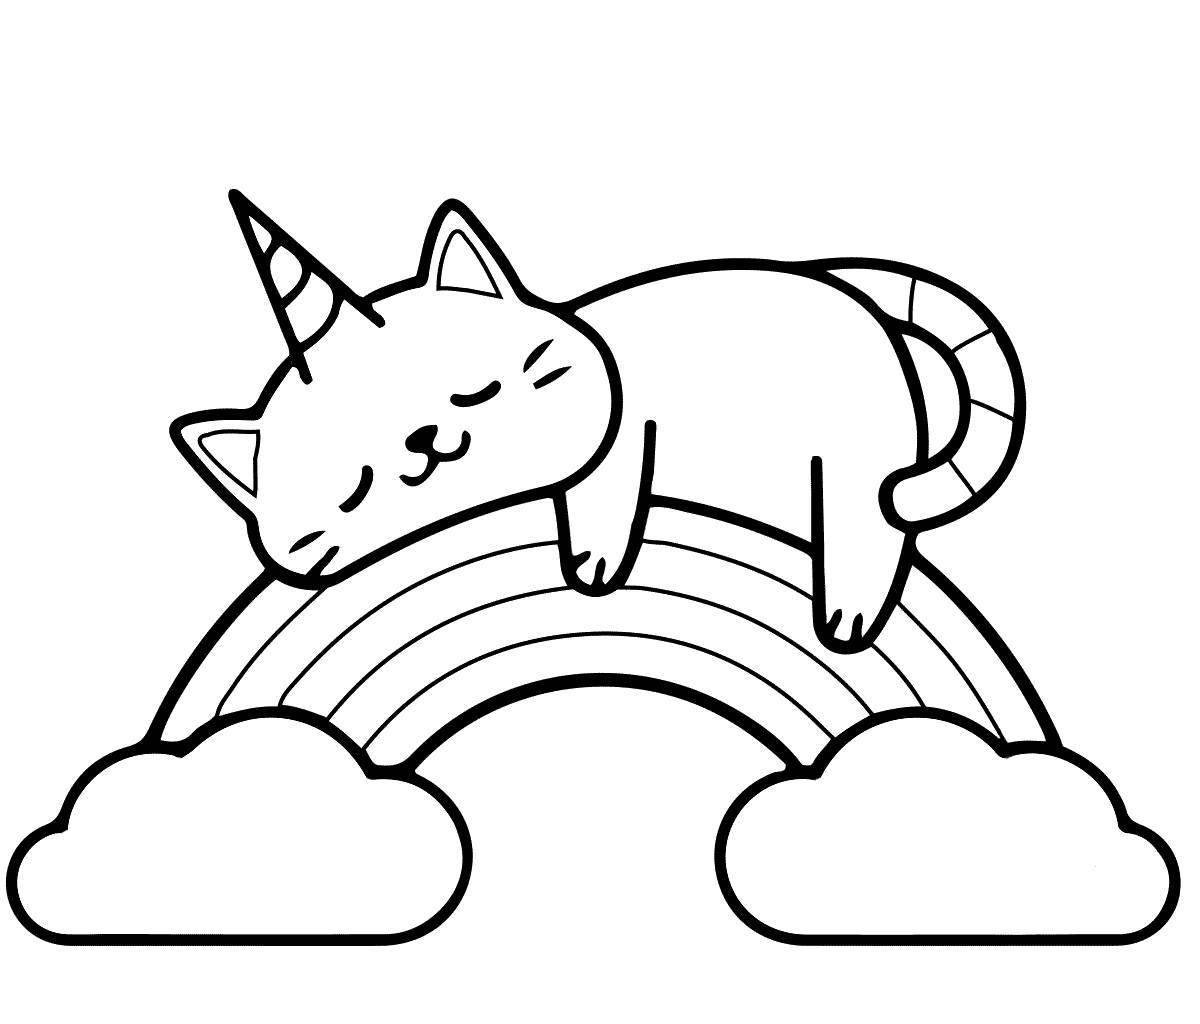 Coloring page graceful rainbow cat